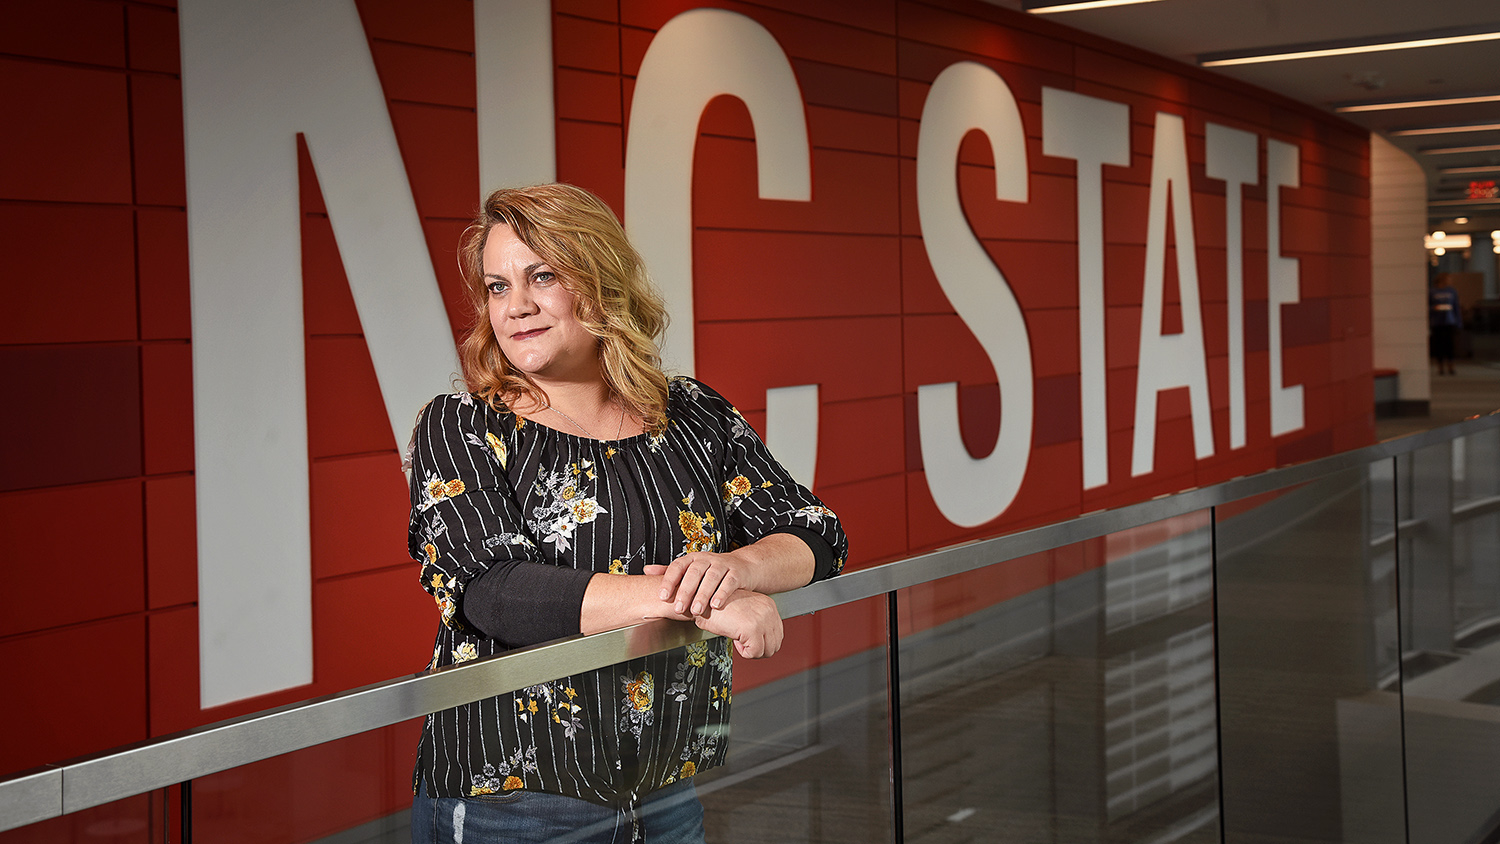 Student Alison Plumley stands in front of the words "NC State" at Talley Student Union.